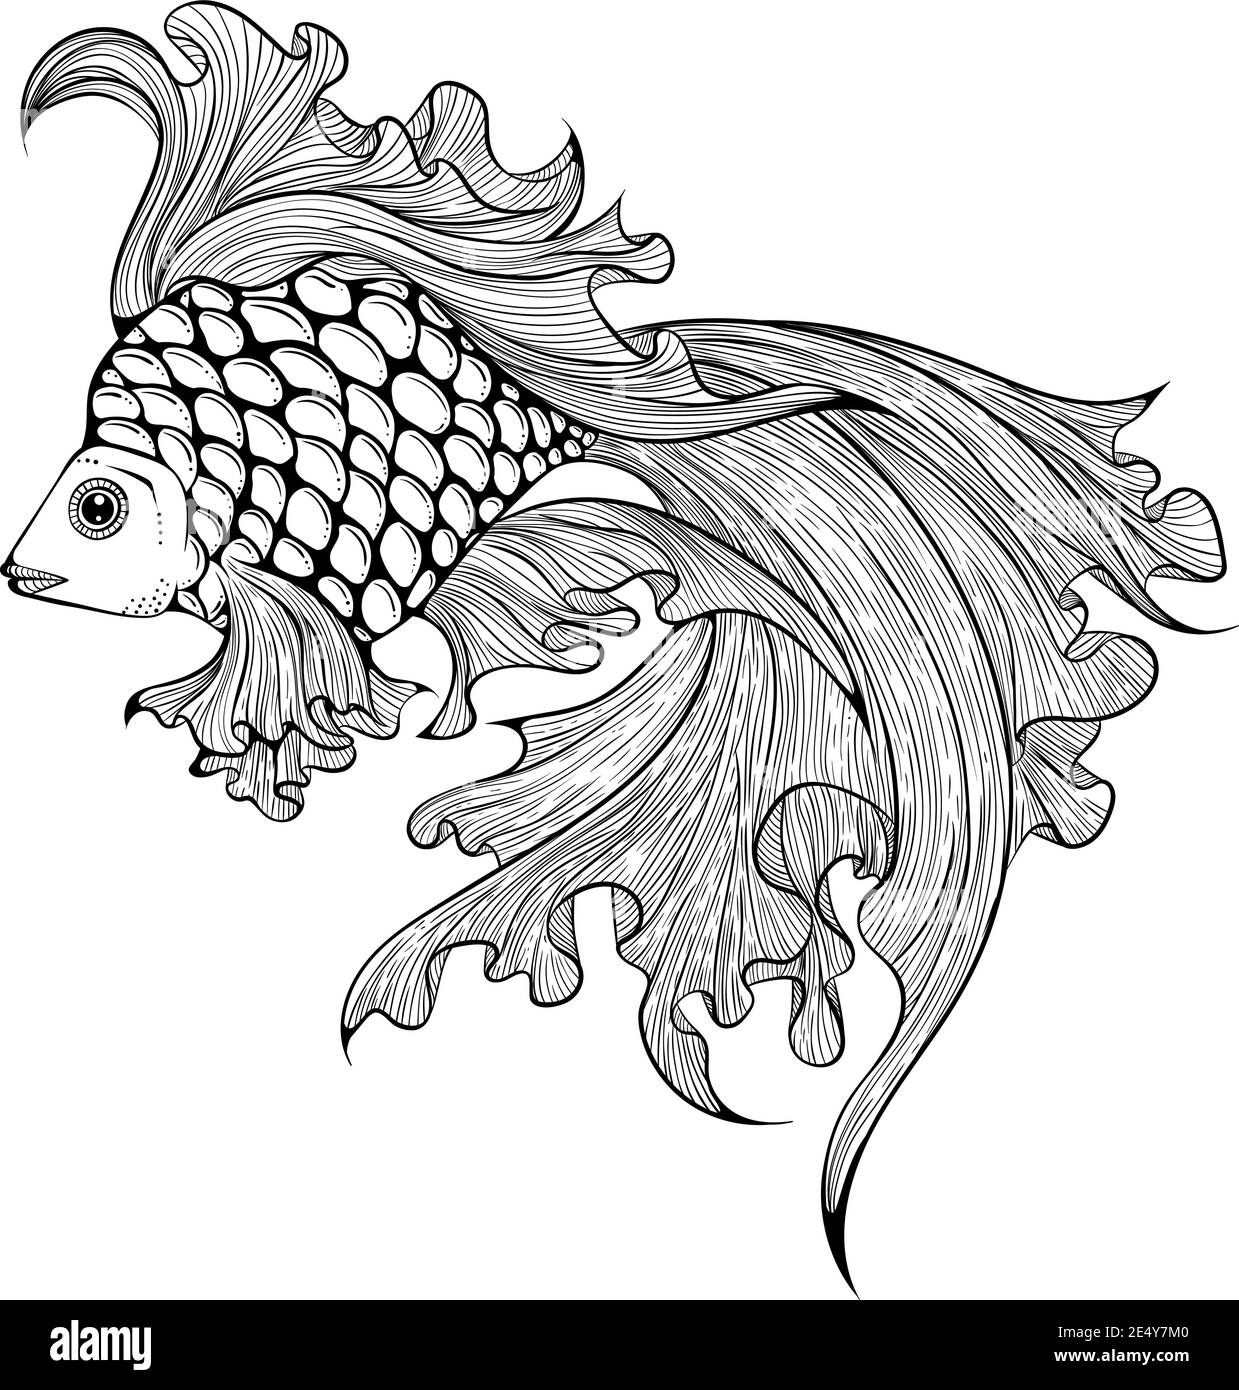 Aquarium goldfish in line art hand drawing style. Veil tail fish vector illustration isolated on white background. Fish silhouette for your design. Coloring book page Stock Vector